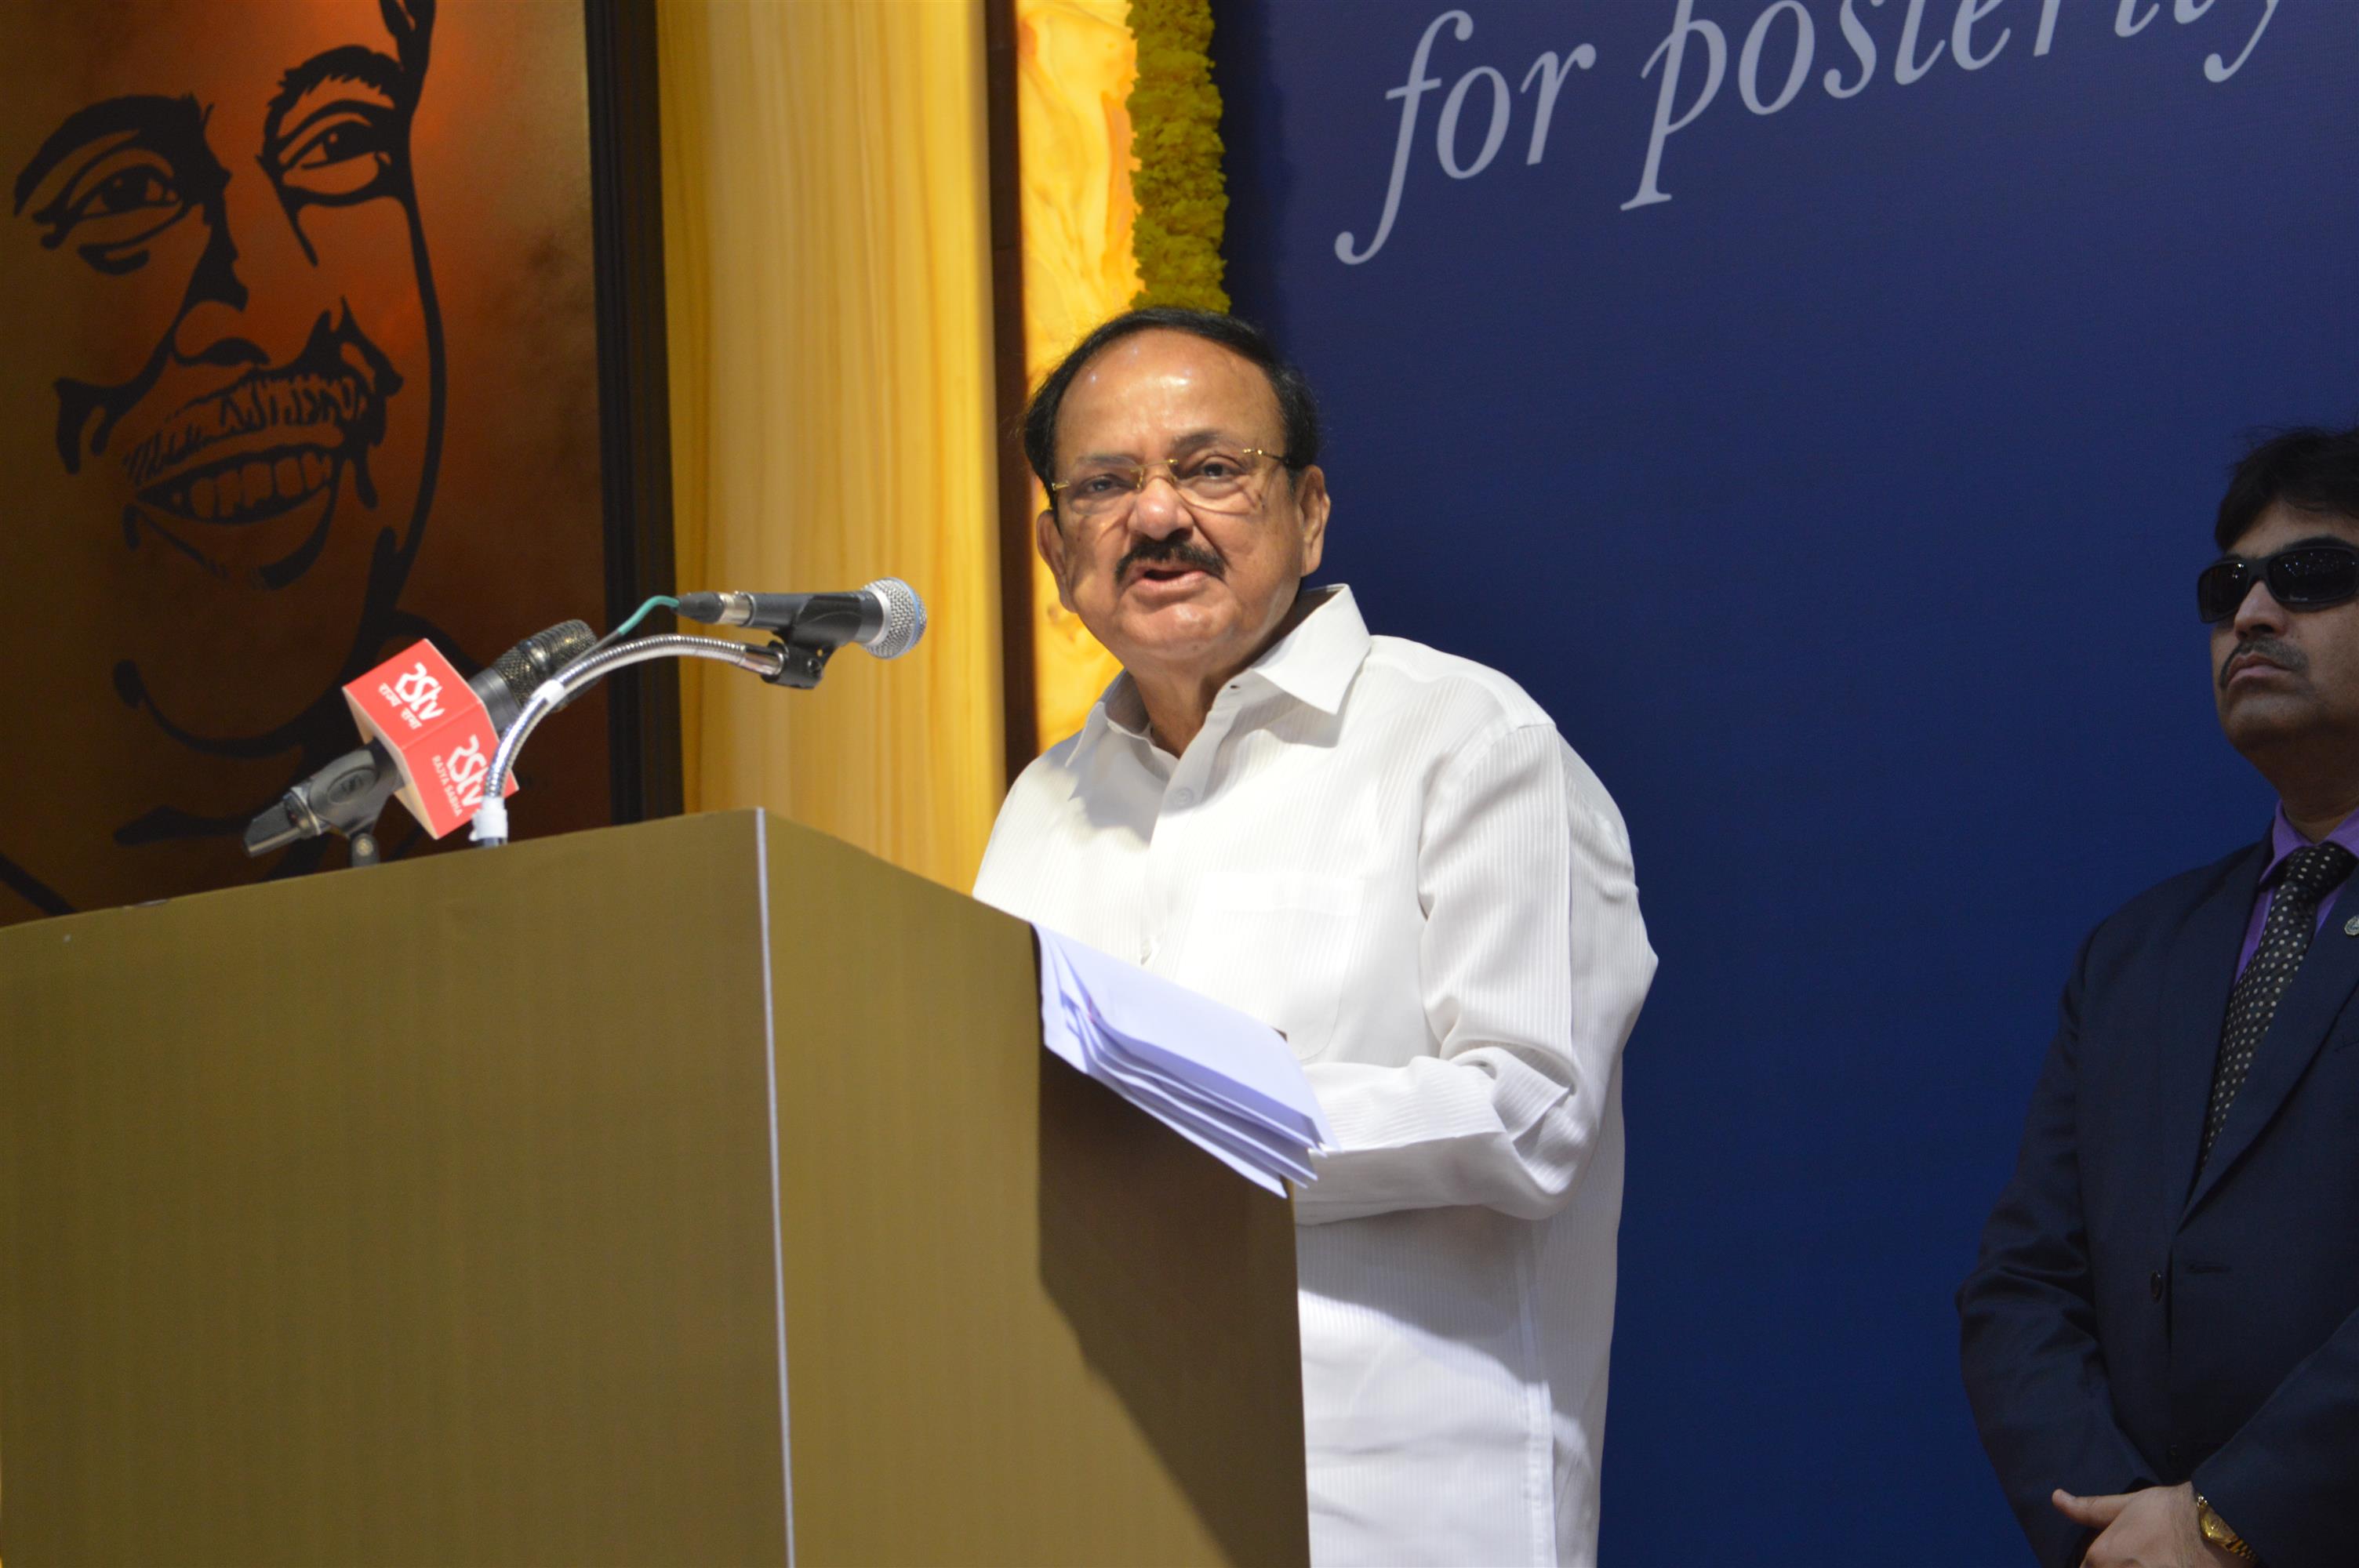 Vice President of India Shri. M. Venkaiah Naidu addressing the gathering at the book release function of Sri Ranganathasamy Temple, Srirangam: preserving antiquity for posterity in Chennai today.(13.07.2019).